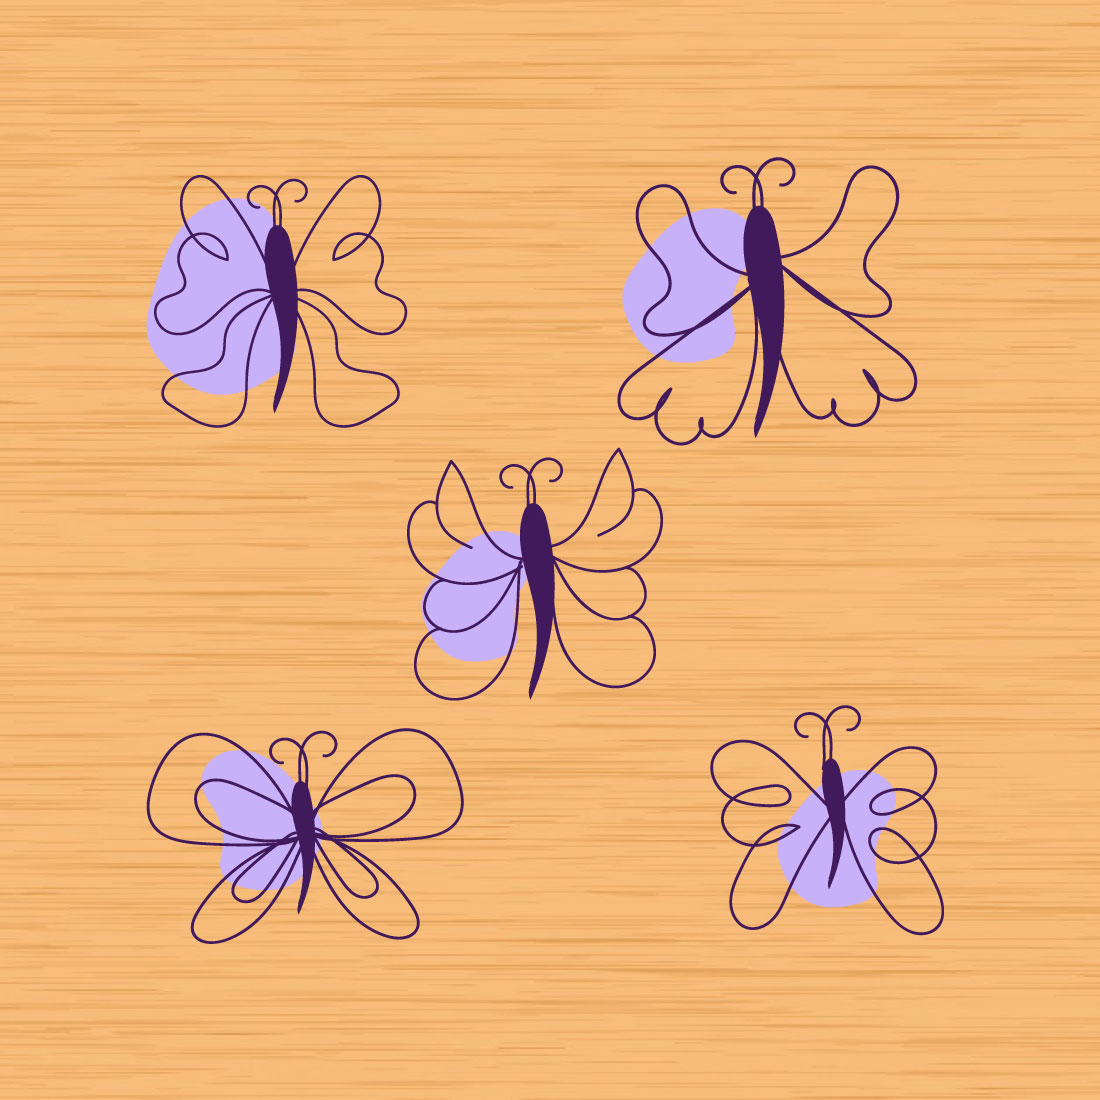 Wooden surface with four purple butterflies on it.